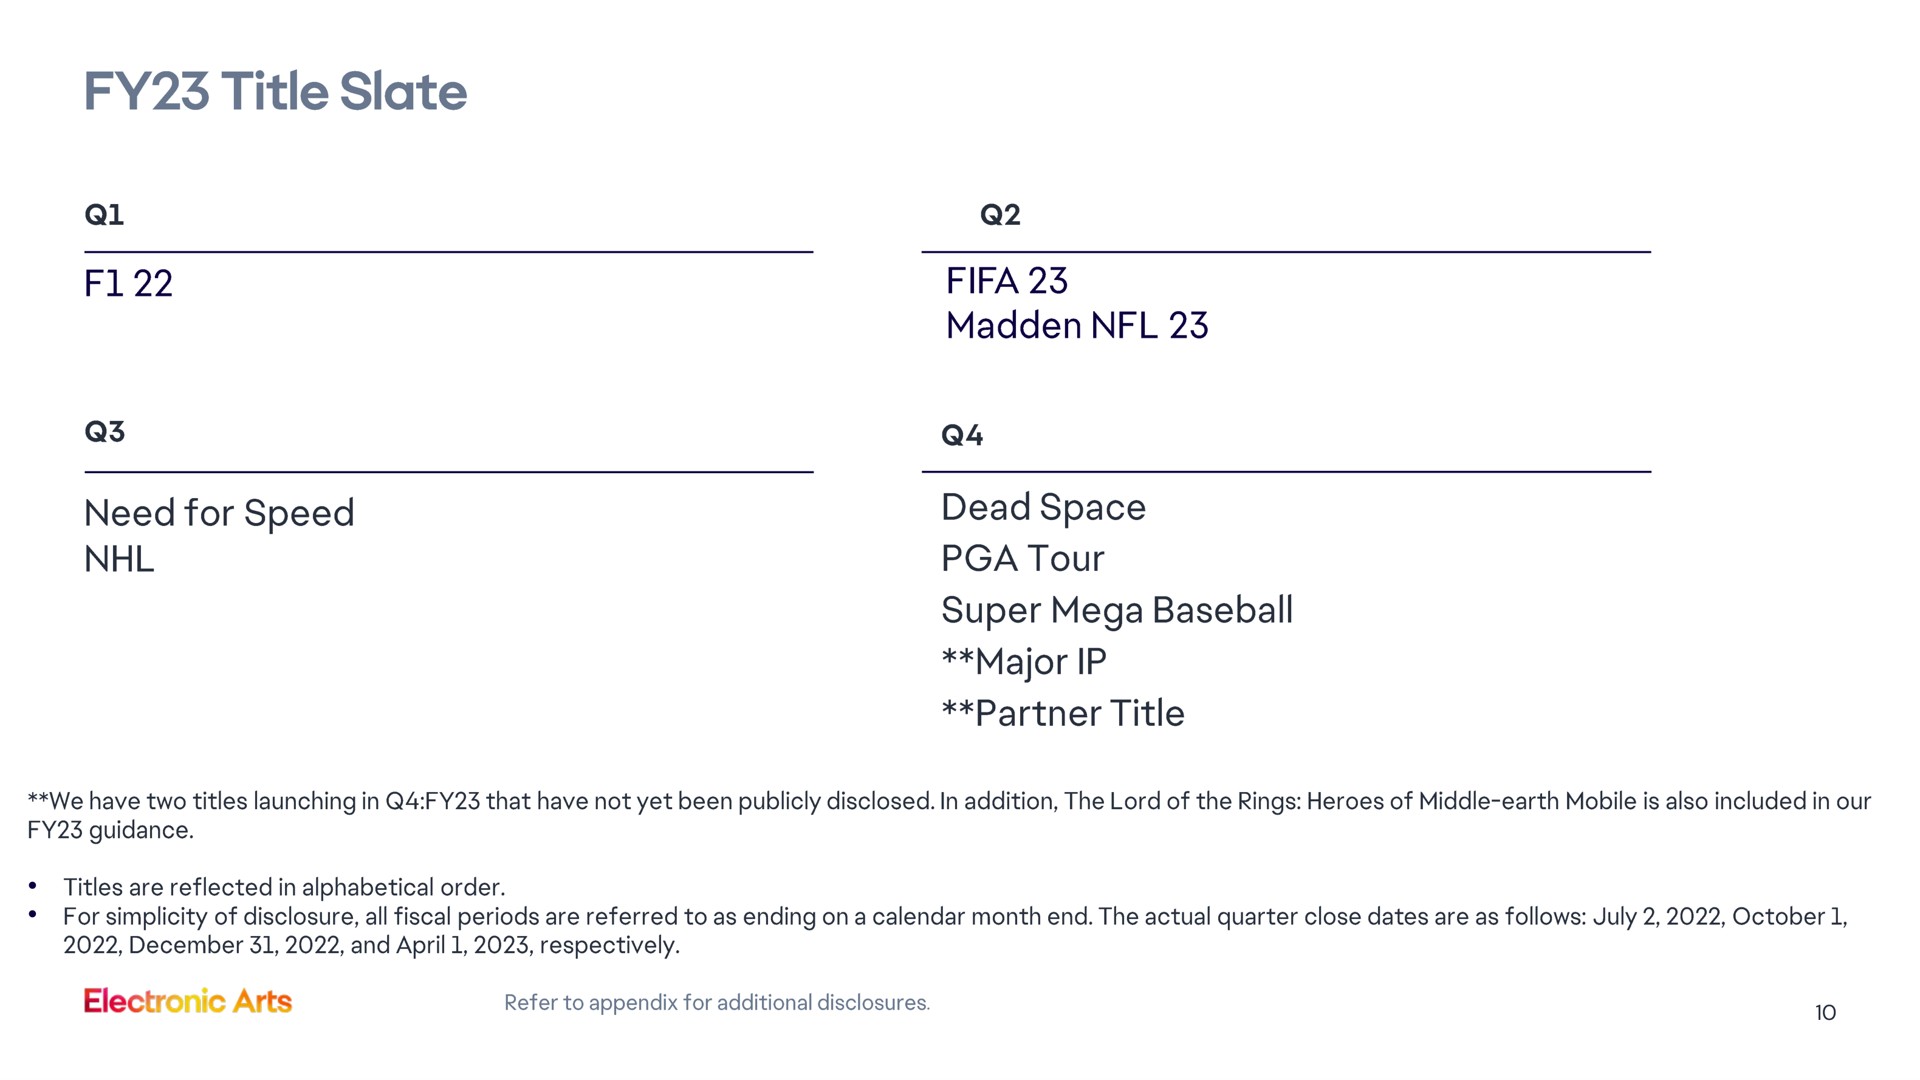 title slate need for speed madden dead space tour super baseball major partner title | Electronic Arts